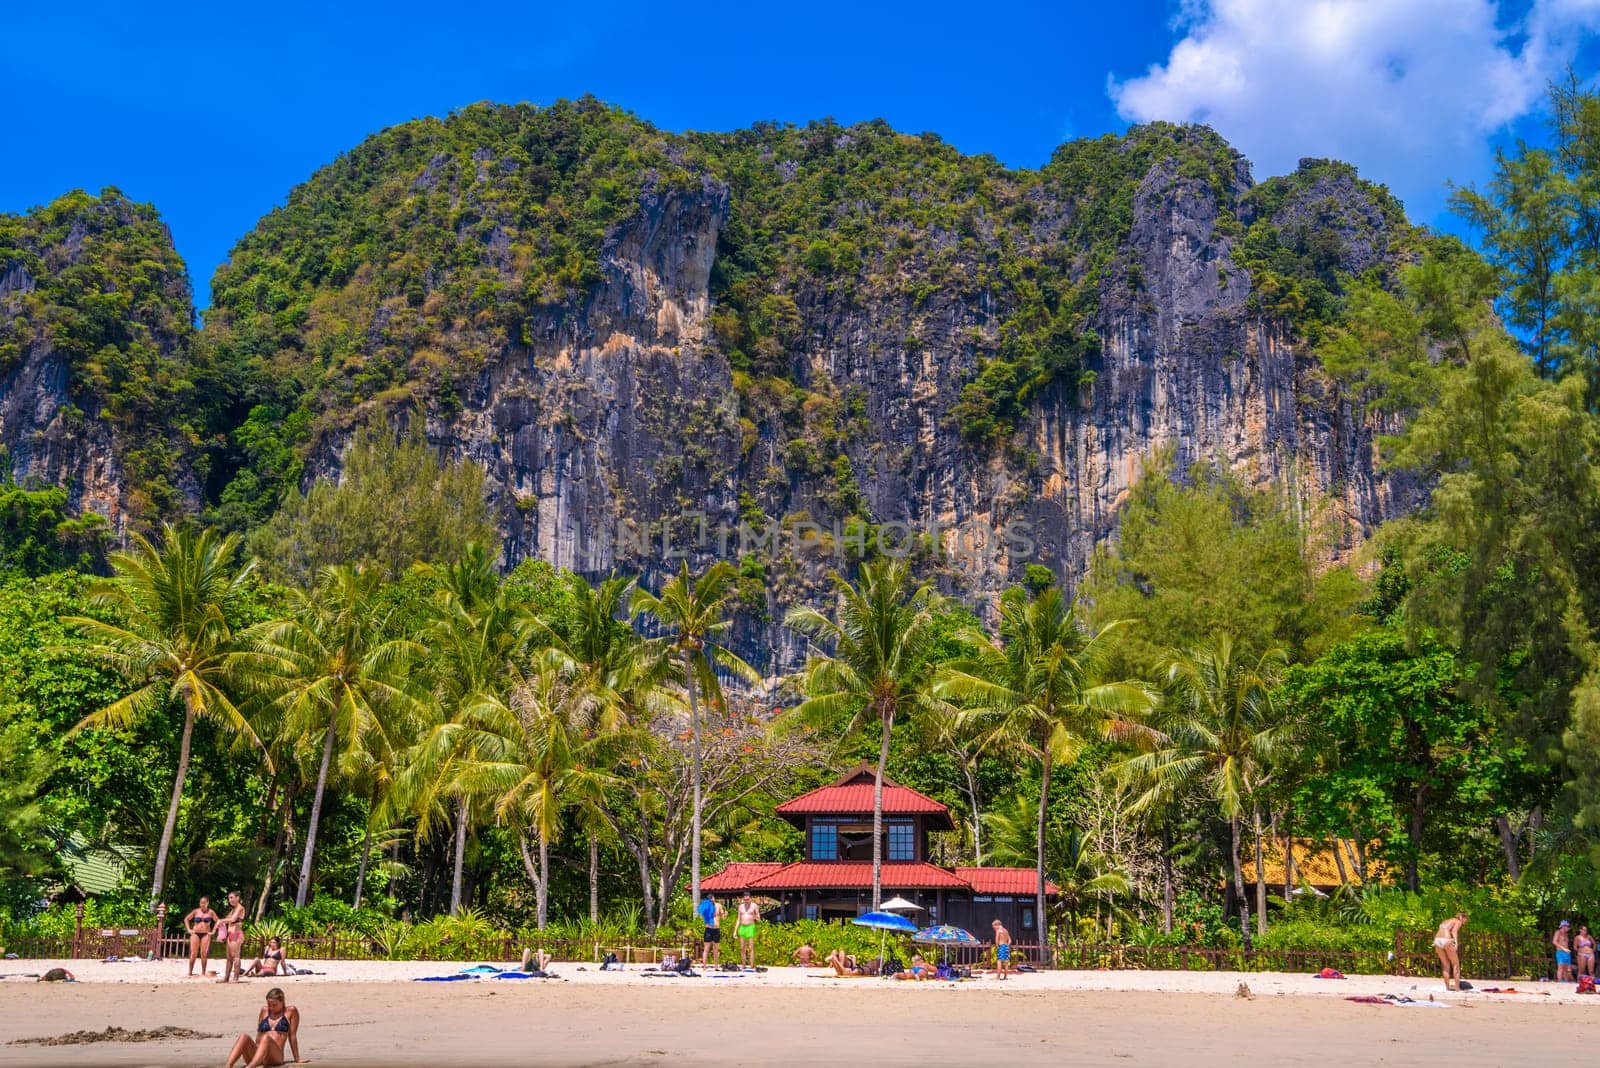 Bungalow house with red roof among coconut palms near the cliffs with people sunbathing and swimming in emerald water on Railay beach west, Ao Nang, Krabi, Thailand by Eagle2308